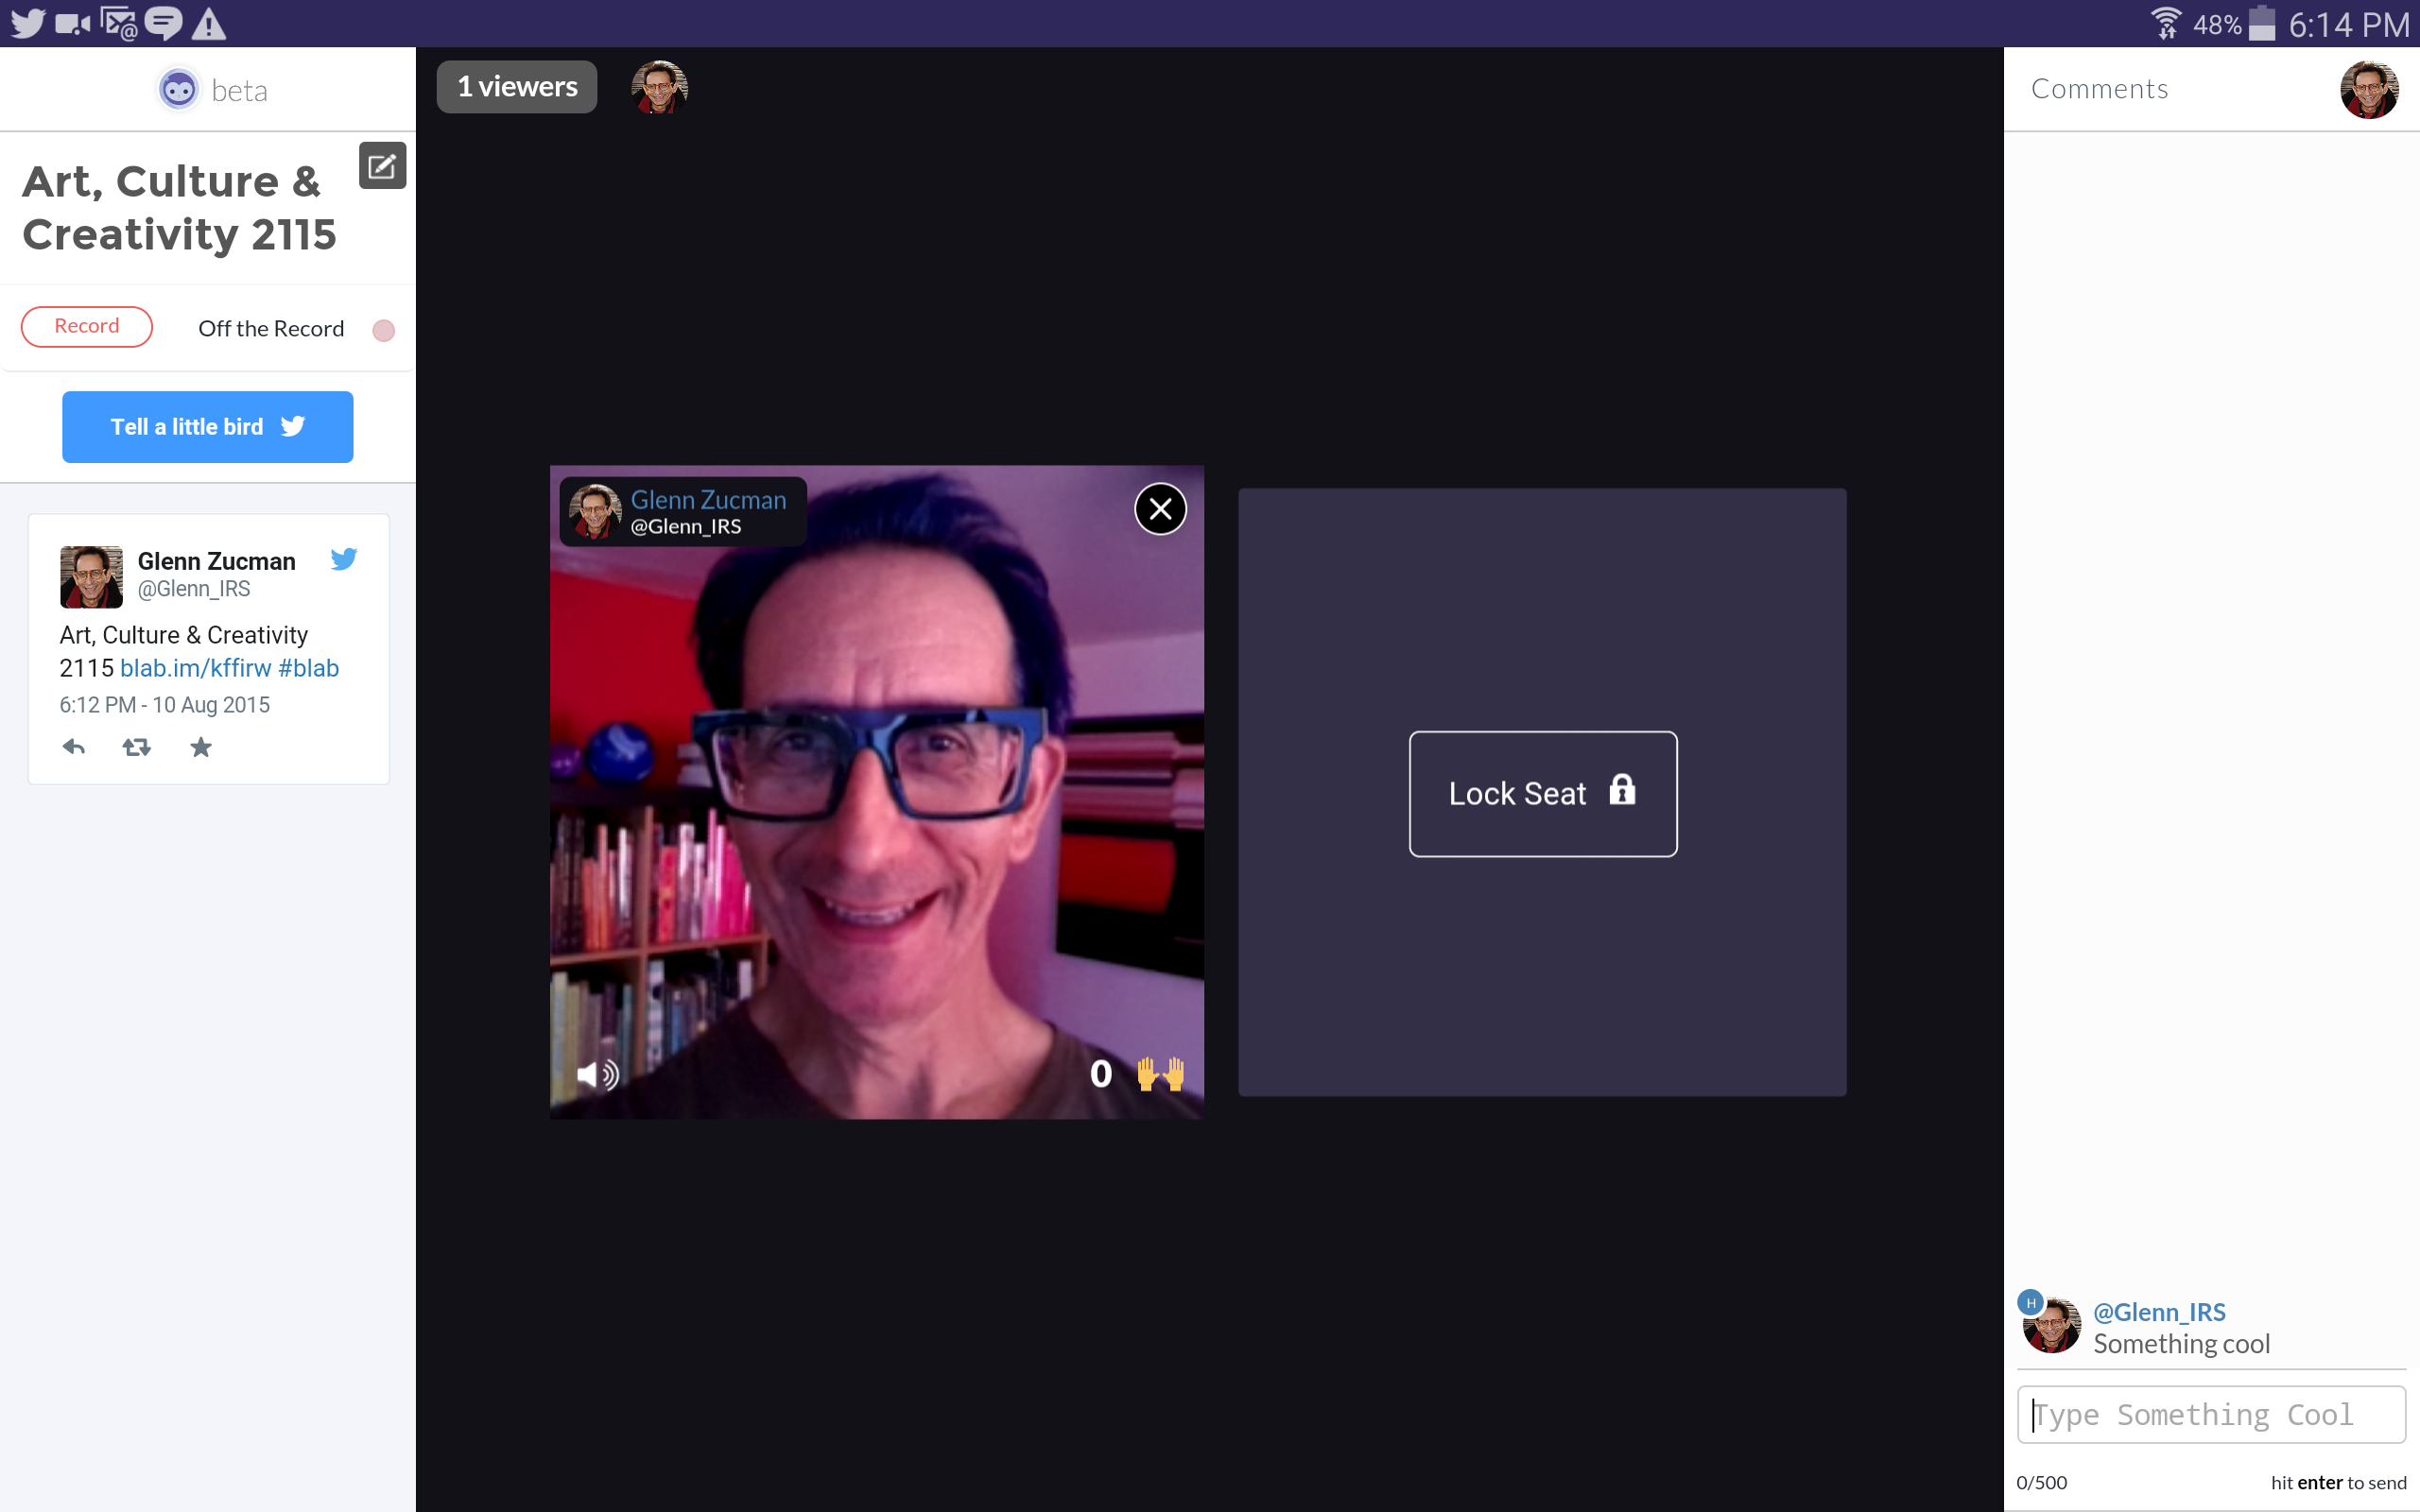 screencap of Blab streaming video app. Shows 4 video frames with chat on sidebar